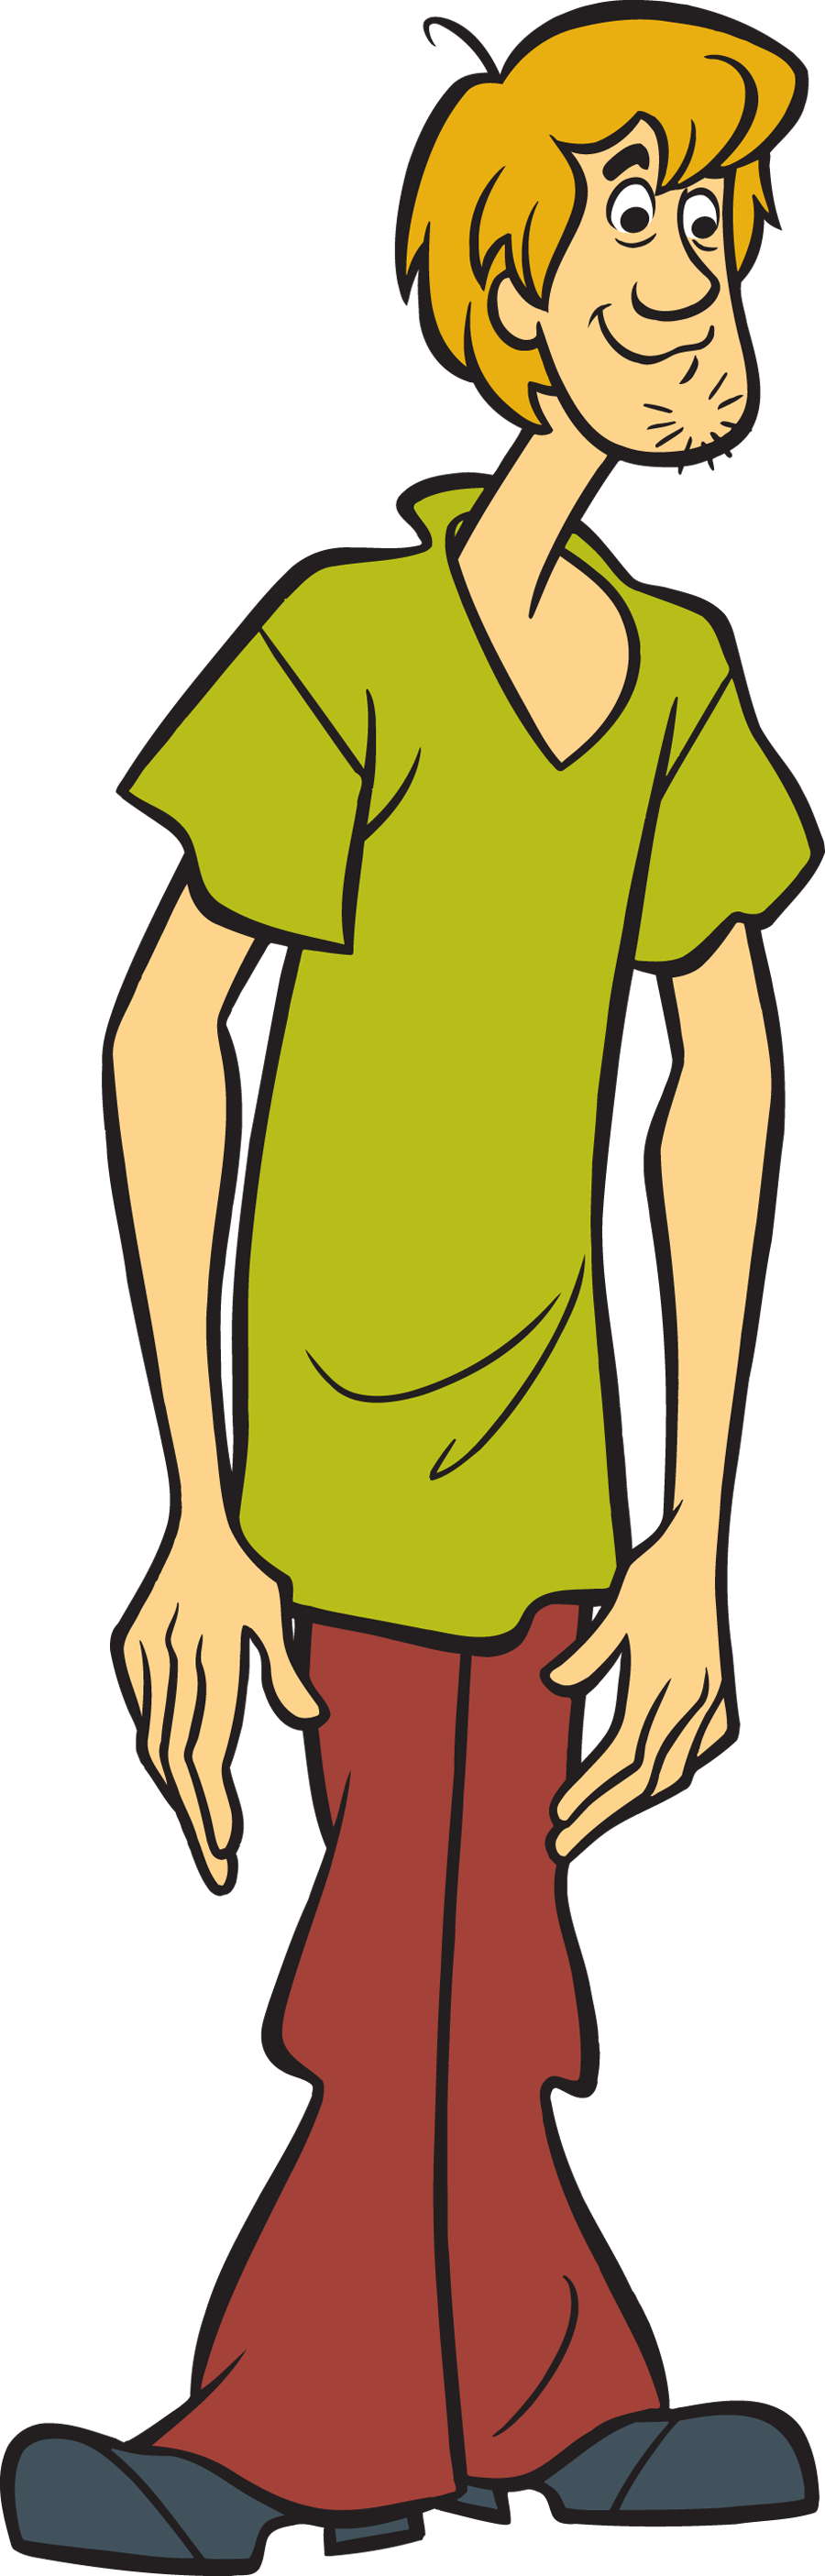 Shaggy Rogers - Man From Scooby Doo (900x2810)